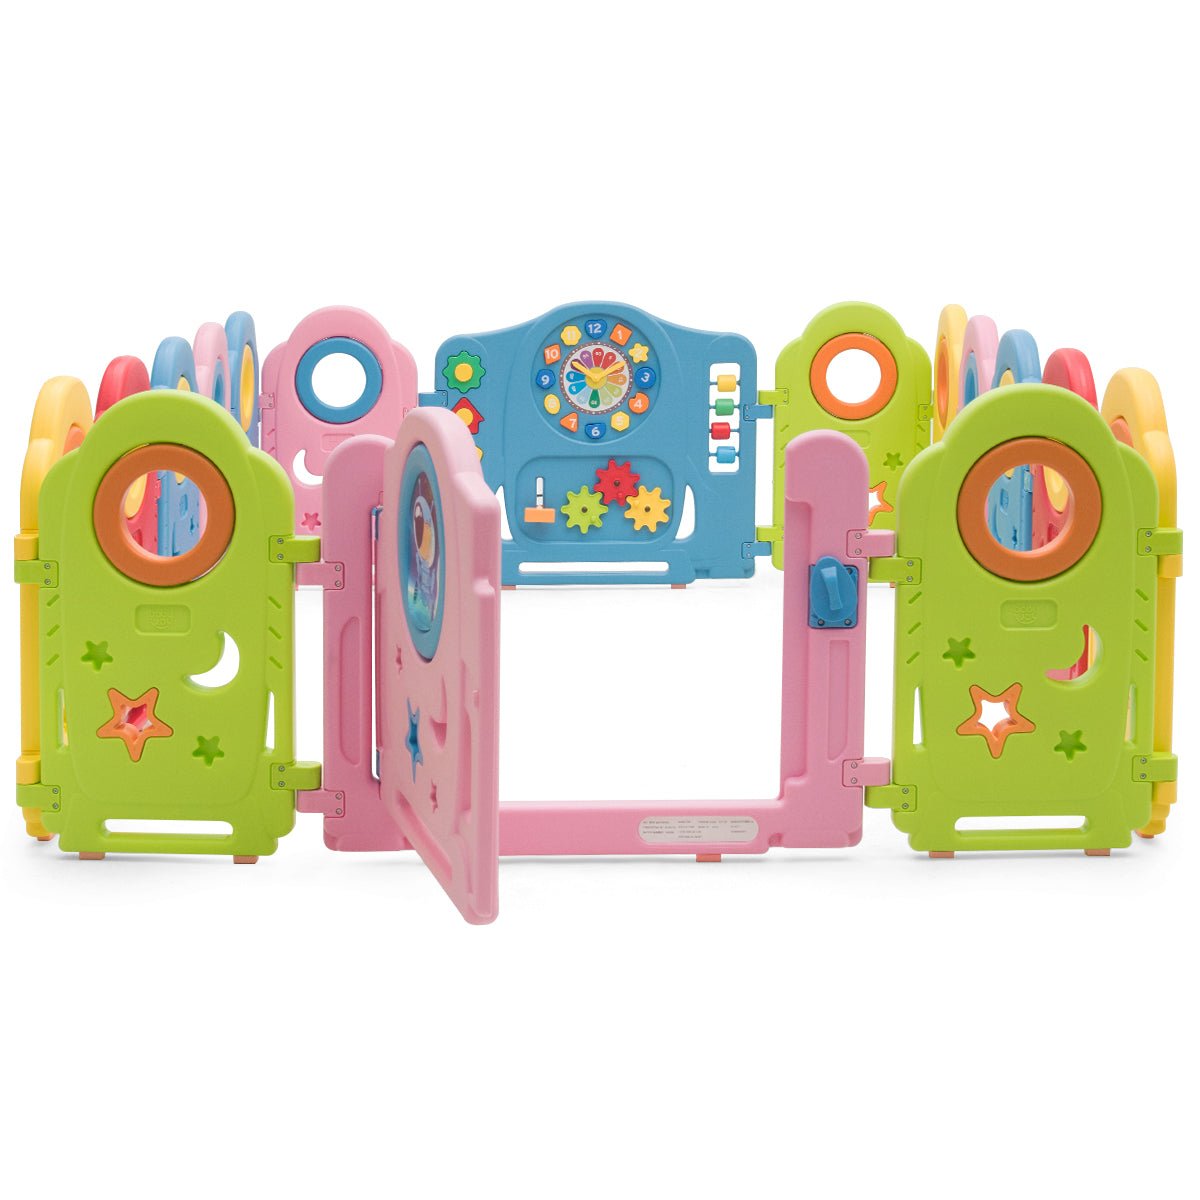 Spacious 16 Panel Baby Play Yard with Safety Lock and Interactive Toys